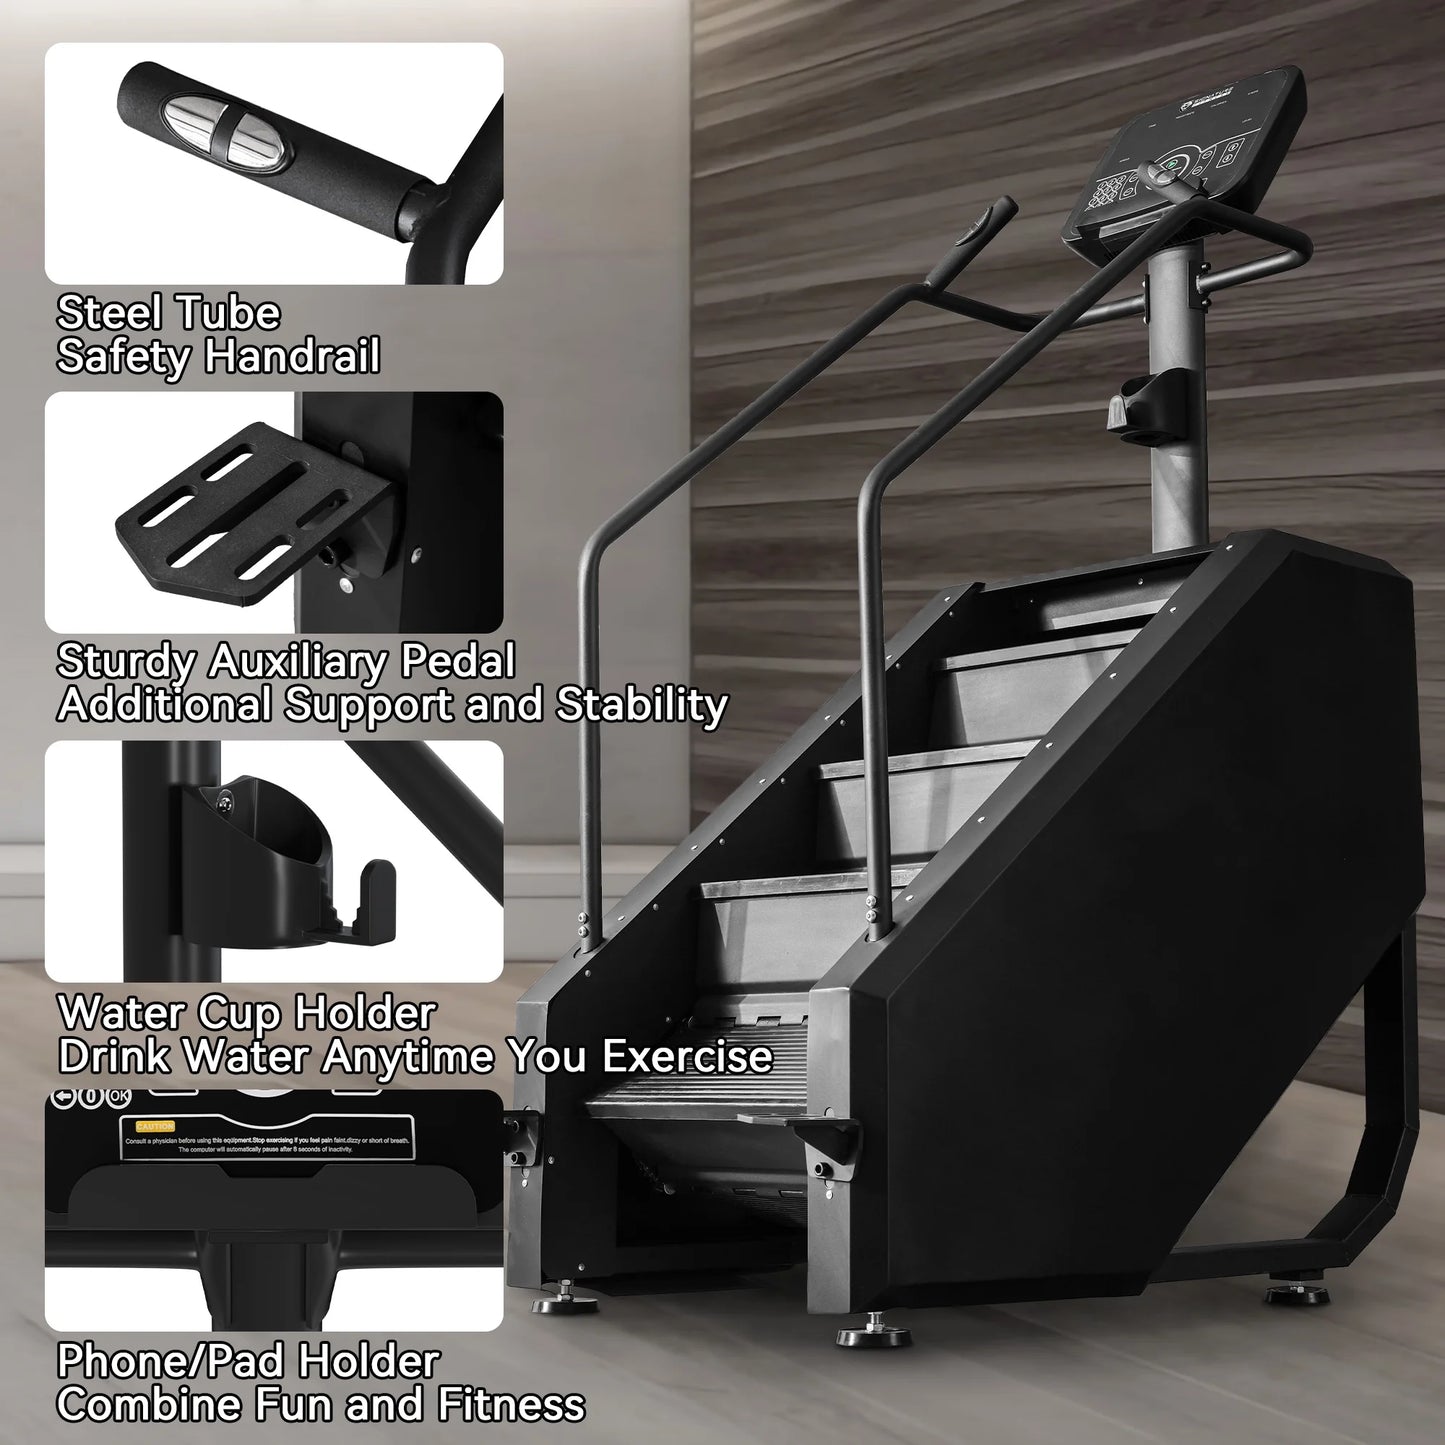 Stair Climber Commercial Grade Stair Step Machine for Cardio and Lower Body Workouts